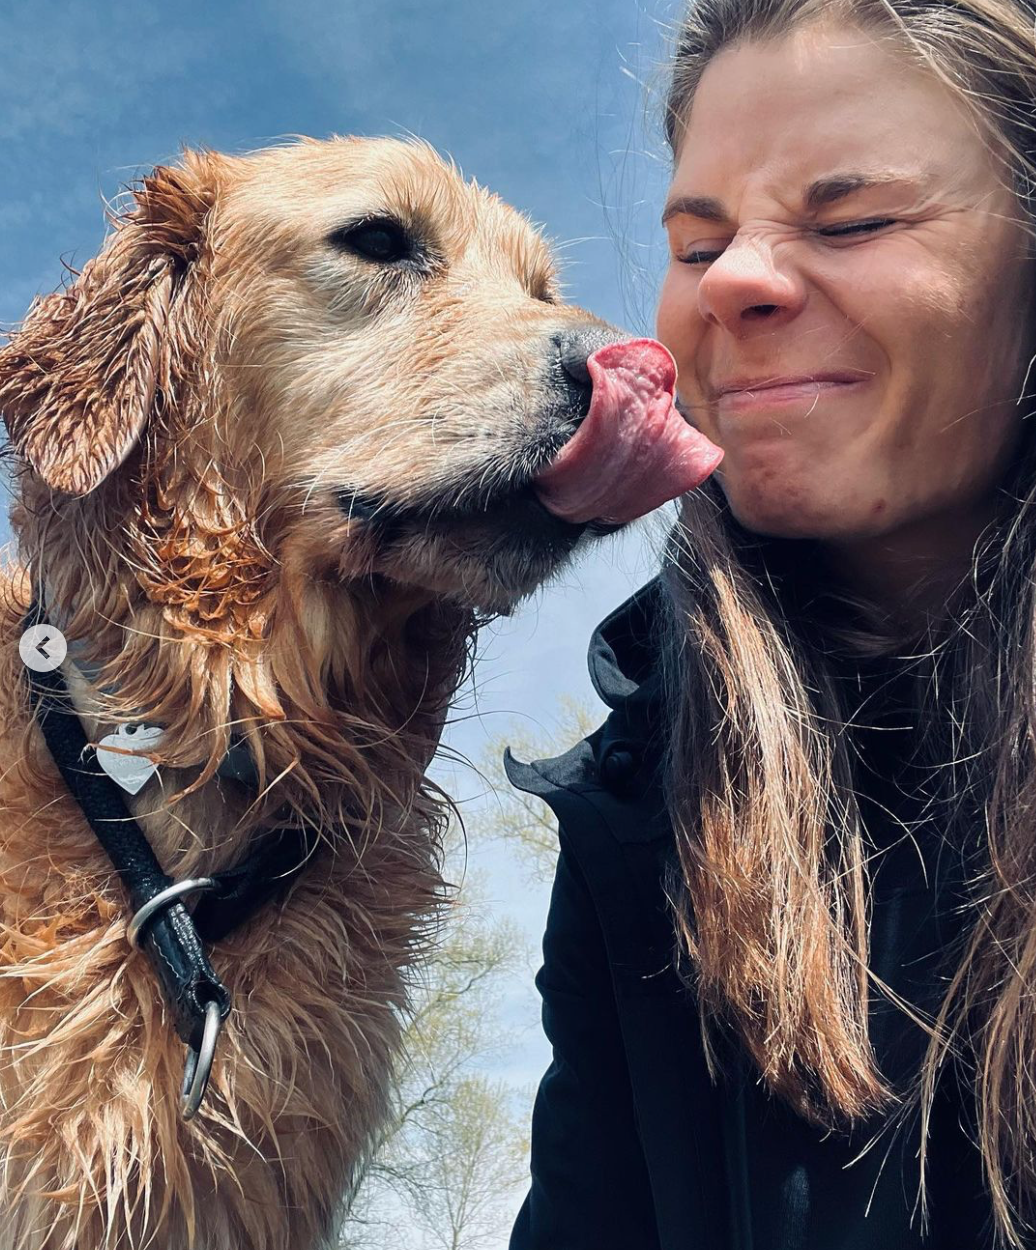 A woman grimaces as a dog licks her face 